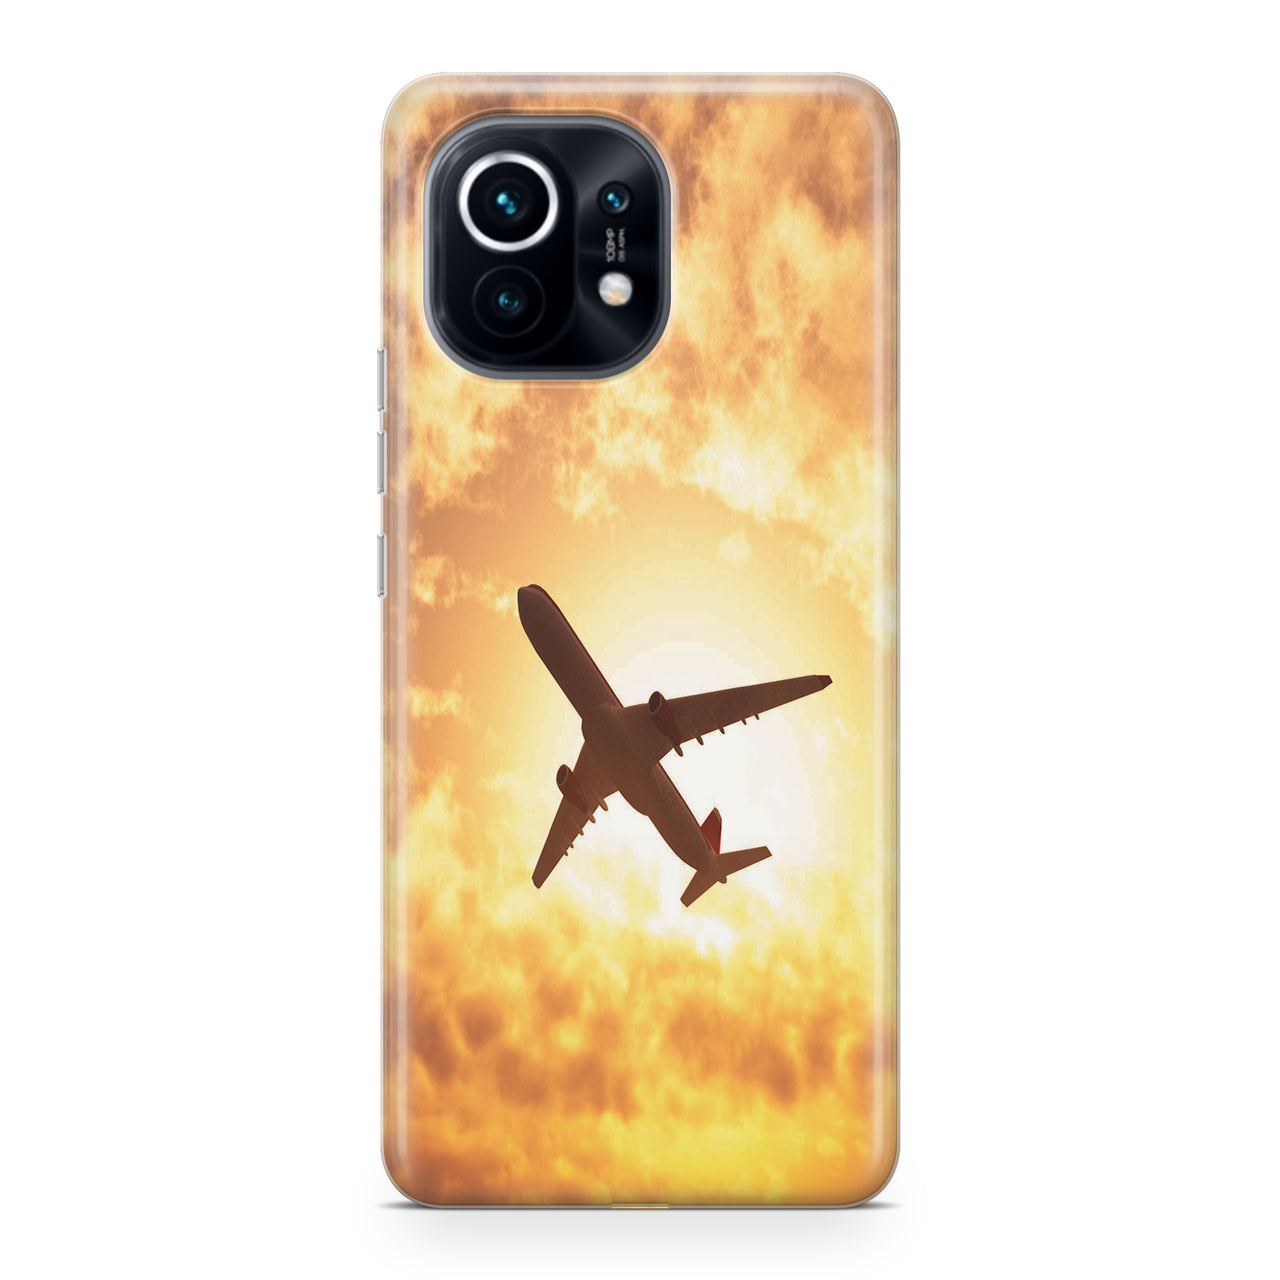 Plane Passing By Designed Xiaomi Cases